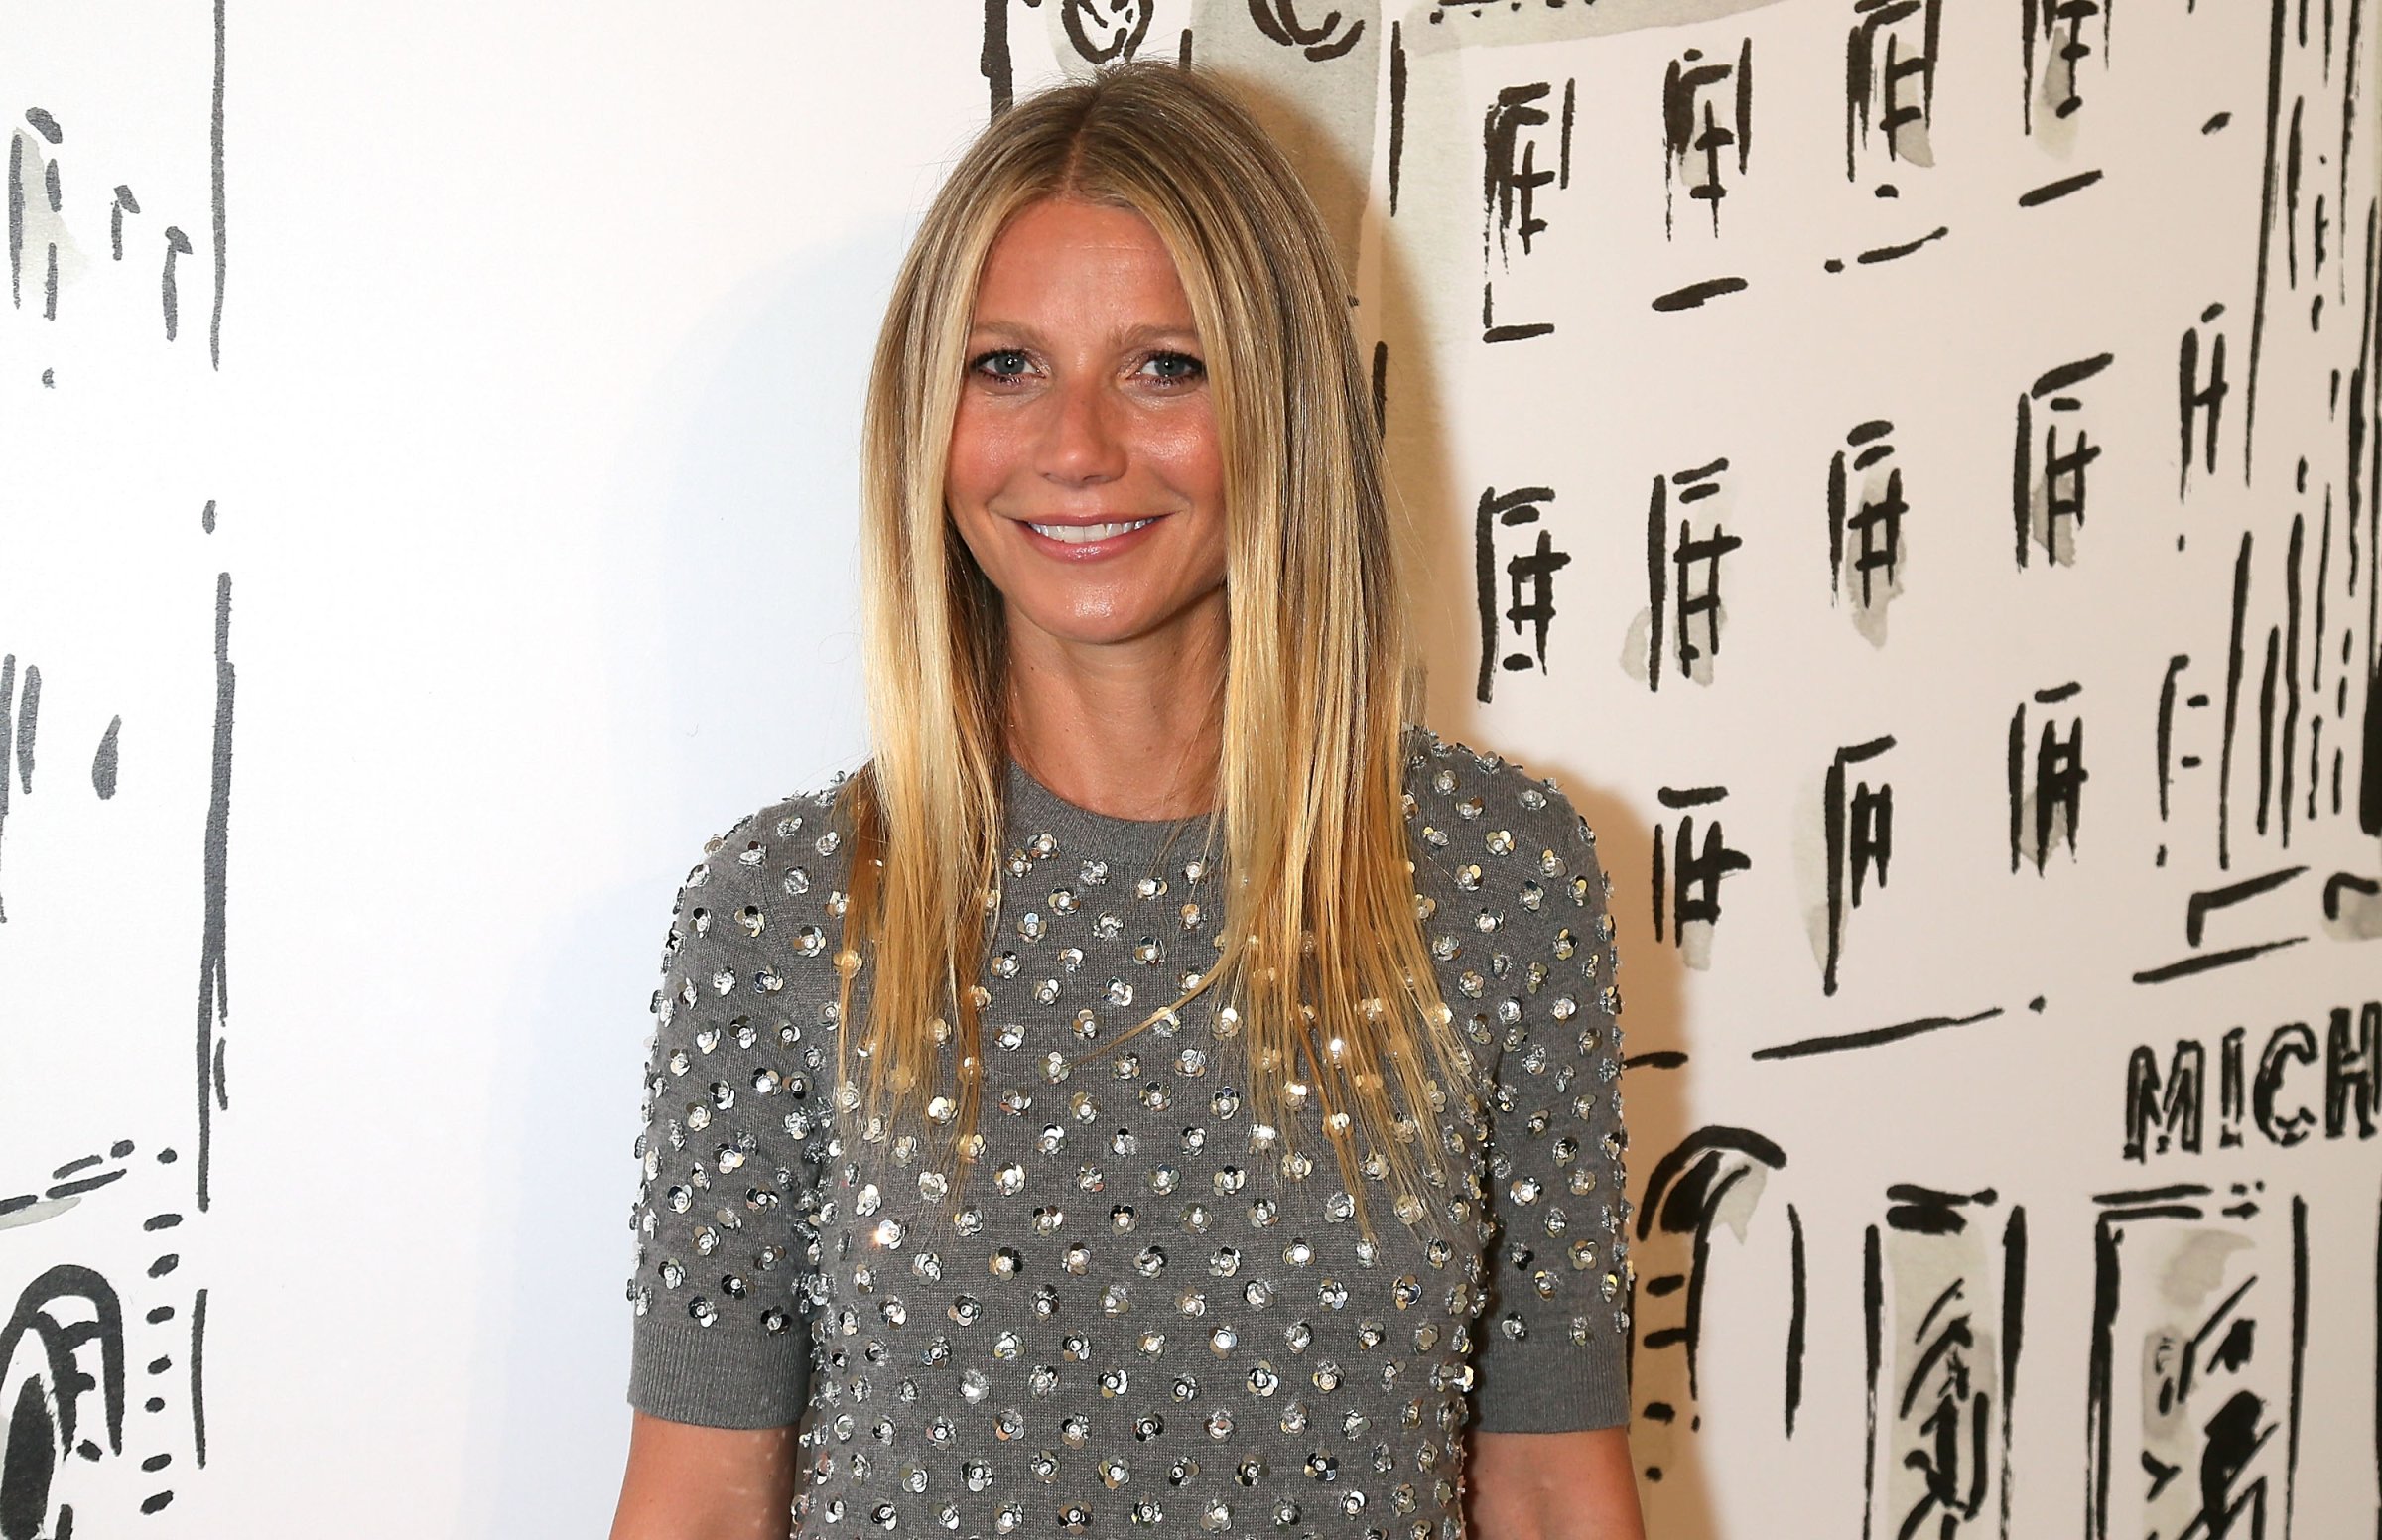 Gwyneth Paltrow attends a cocktail party hosted by Michael Kors in celebration of their new Regent Street Flagship Store opening, at the Michael Kors Flagship Store, on June 22, 2016 in London, England.